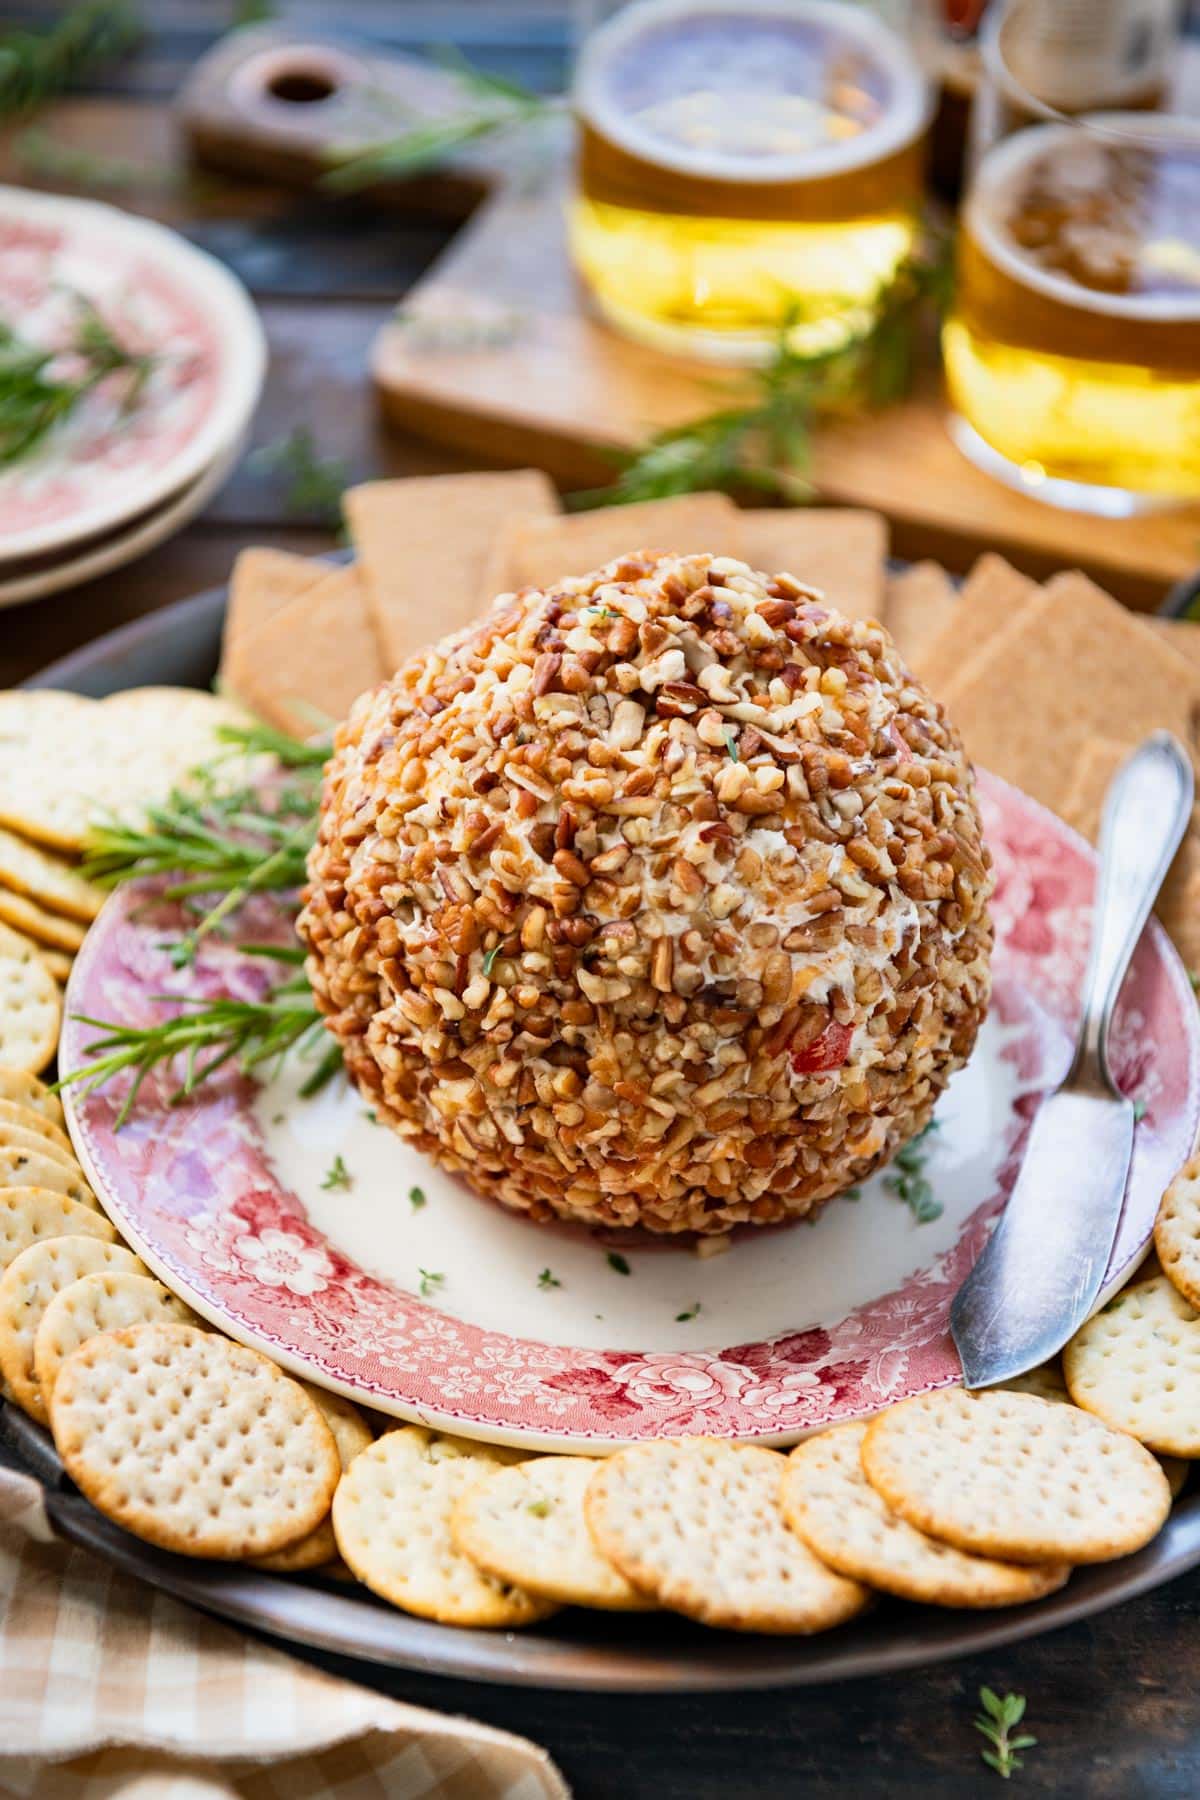 Cheese ball recipe coated in chopped pecans.